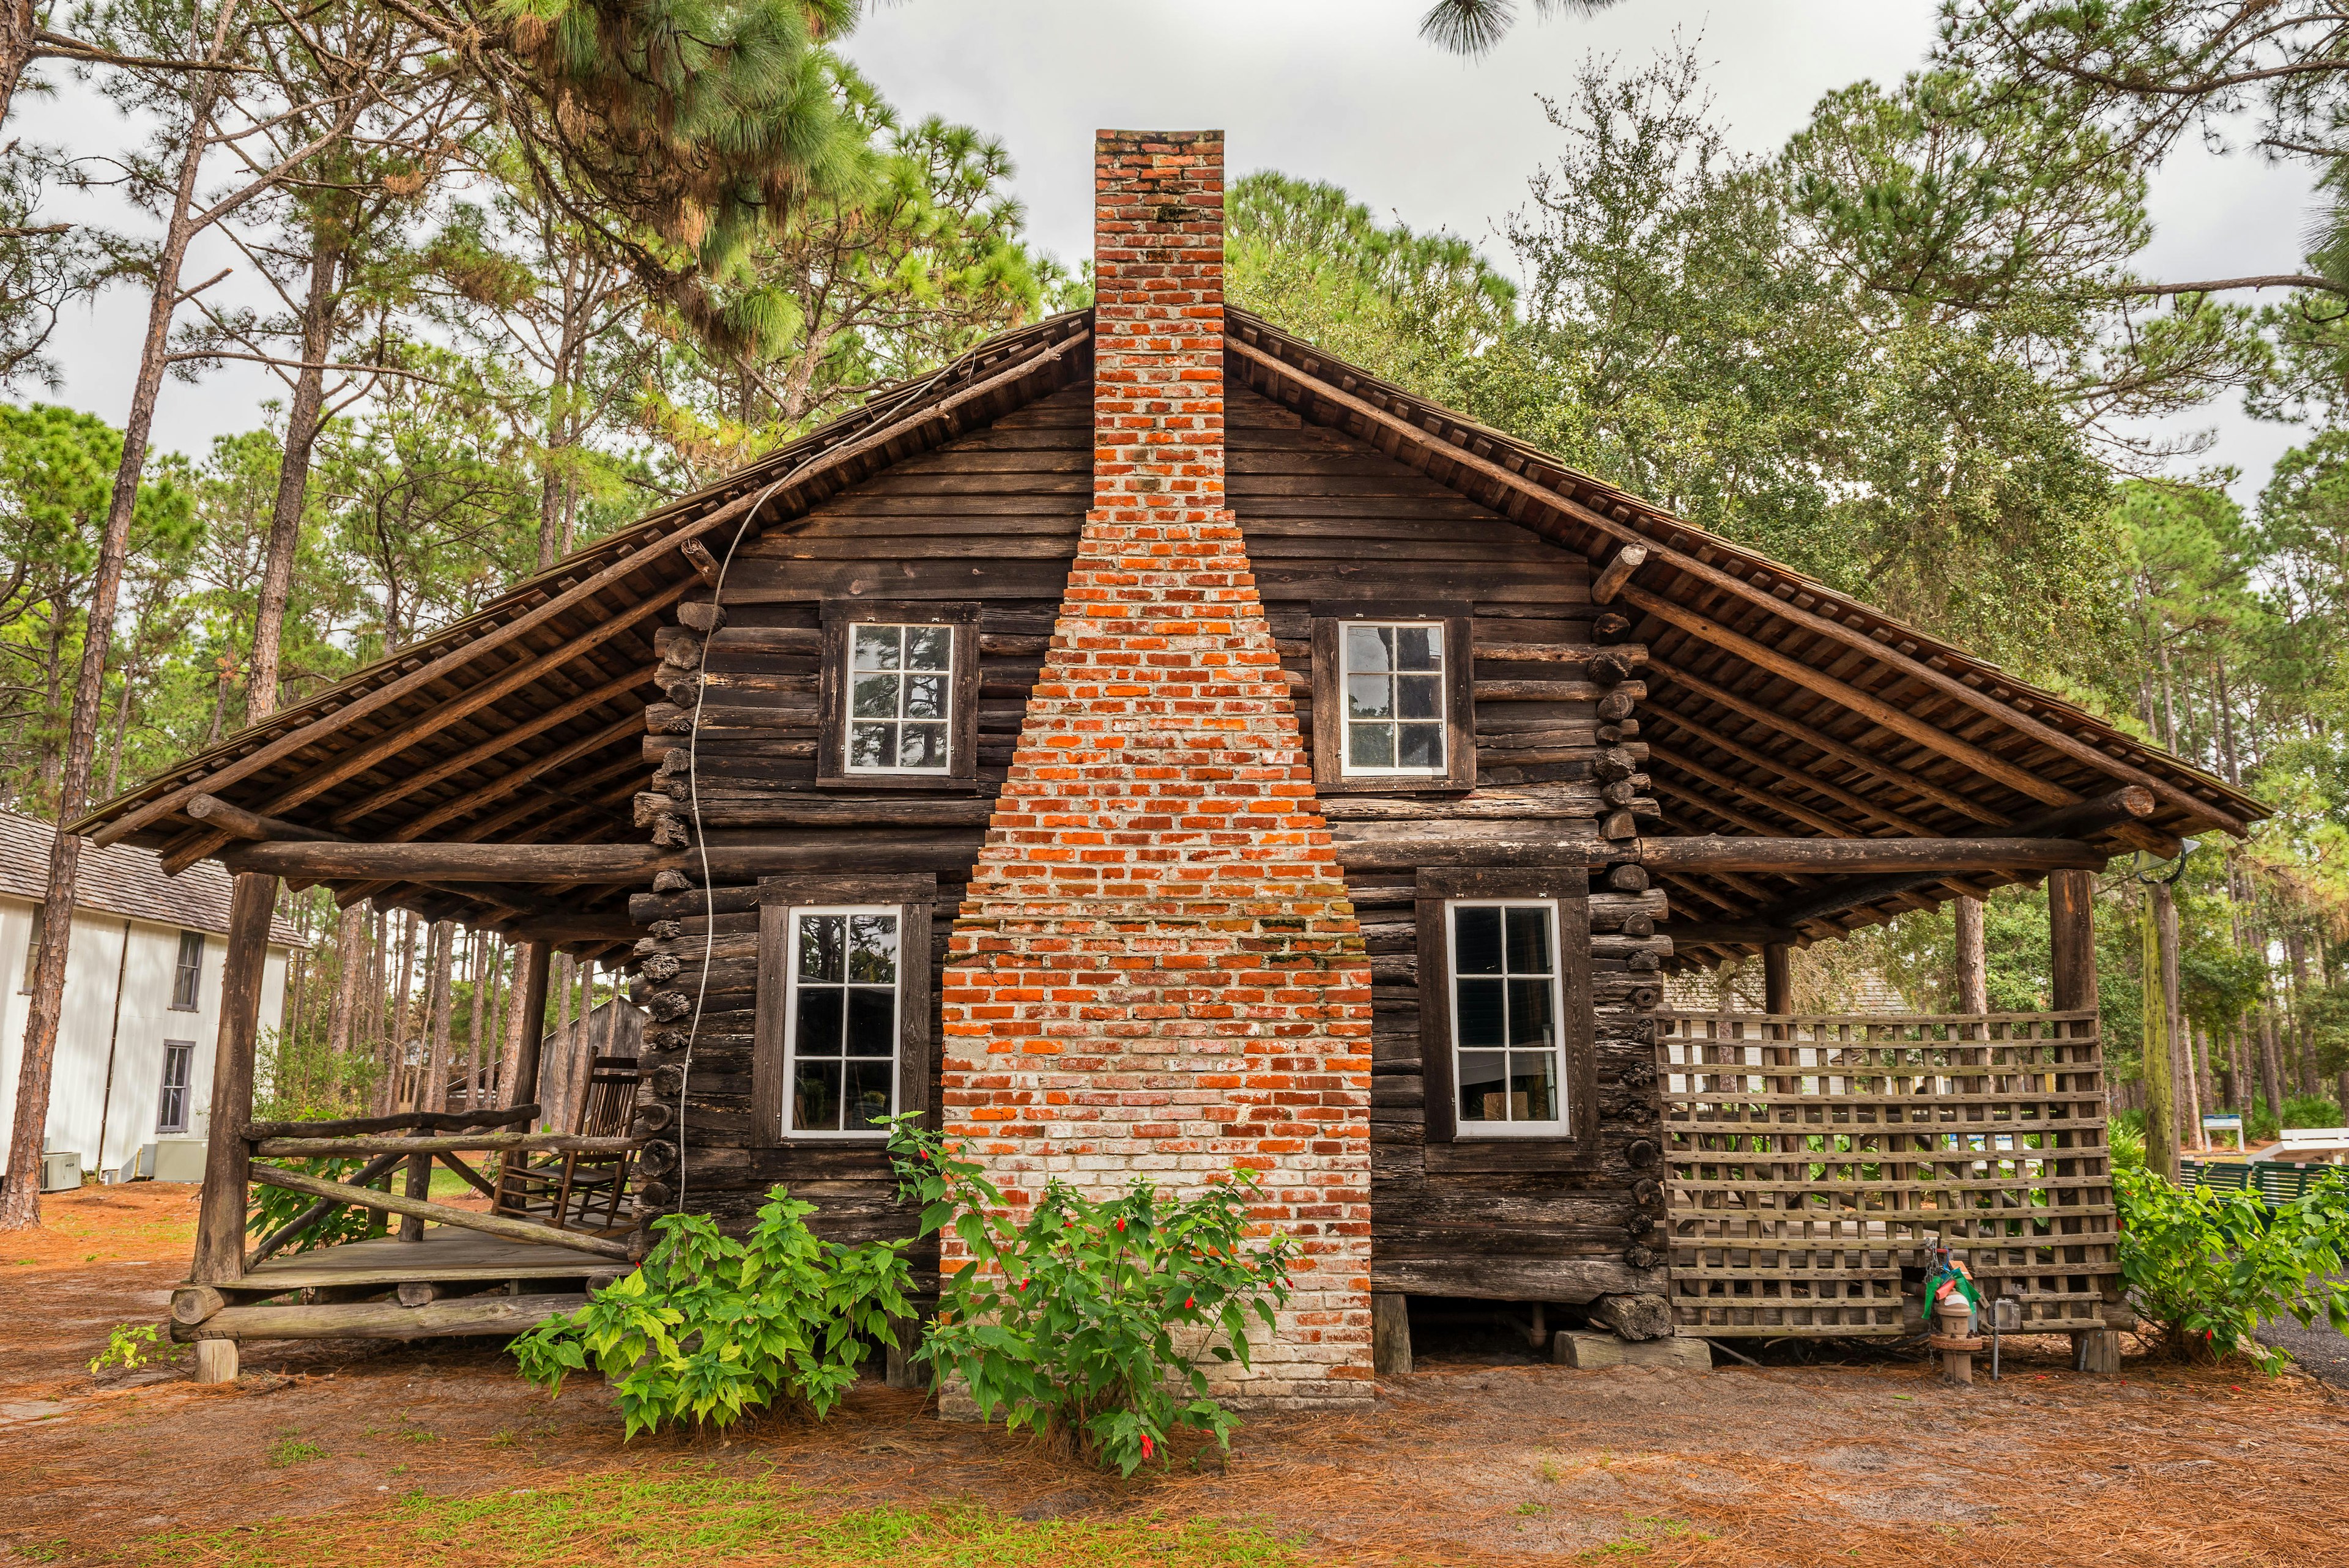 McMullen-Coachman Log House in the Pinellas County Heritage Village